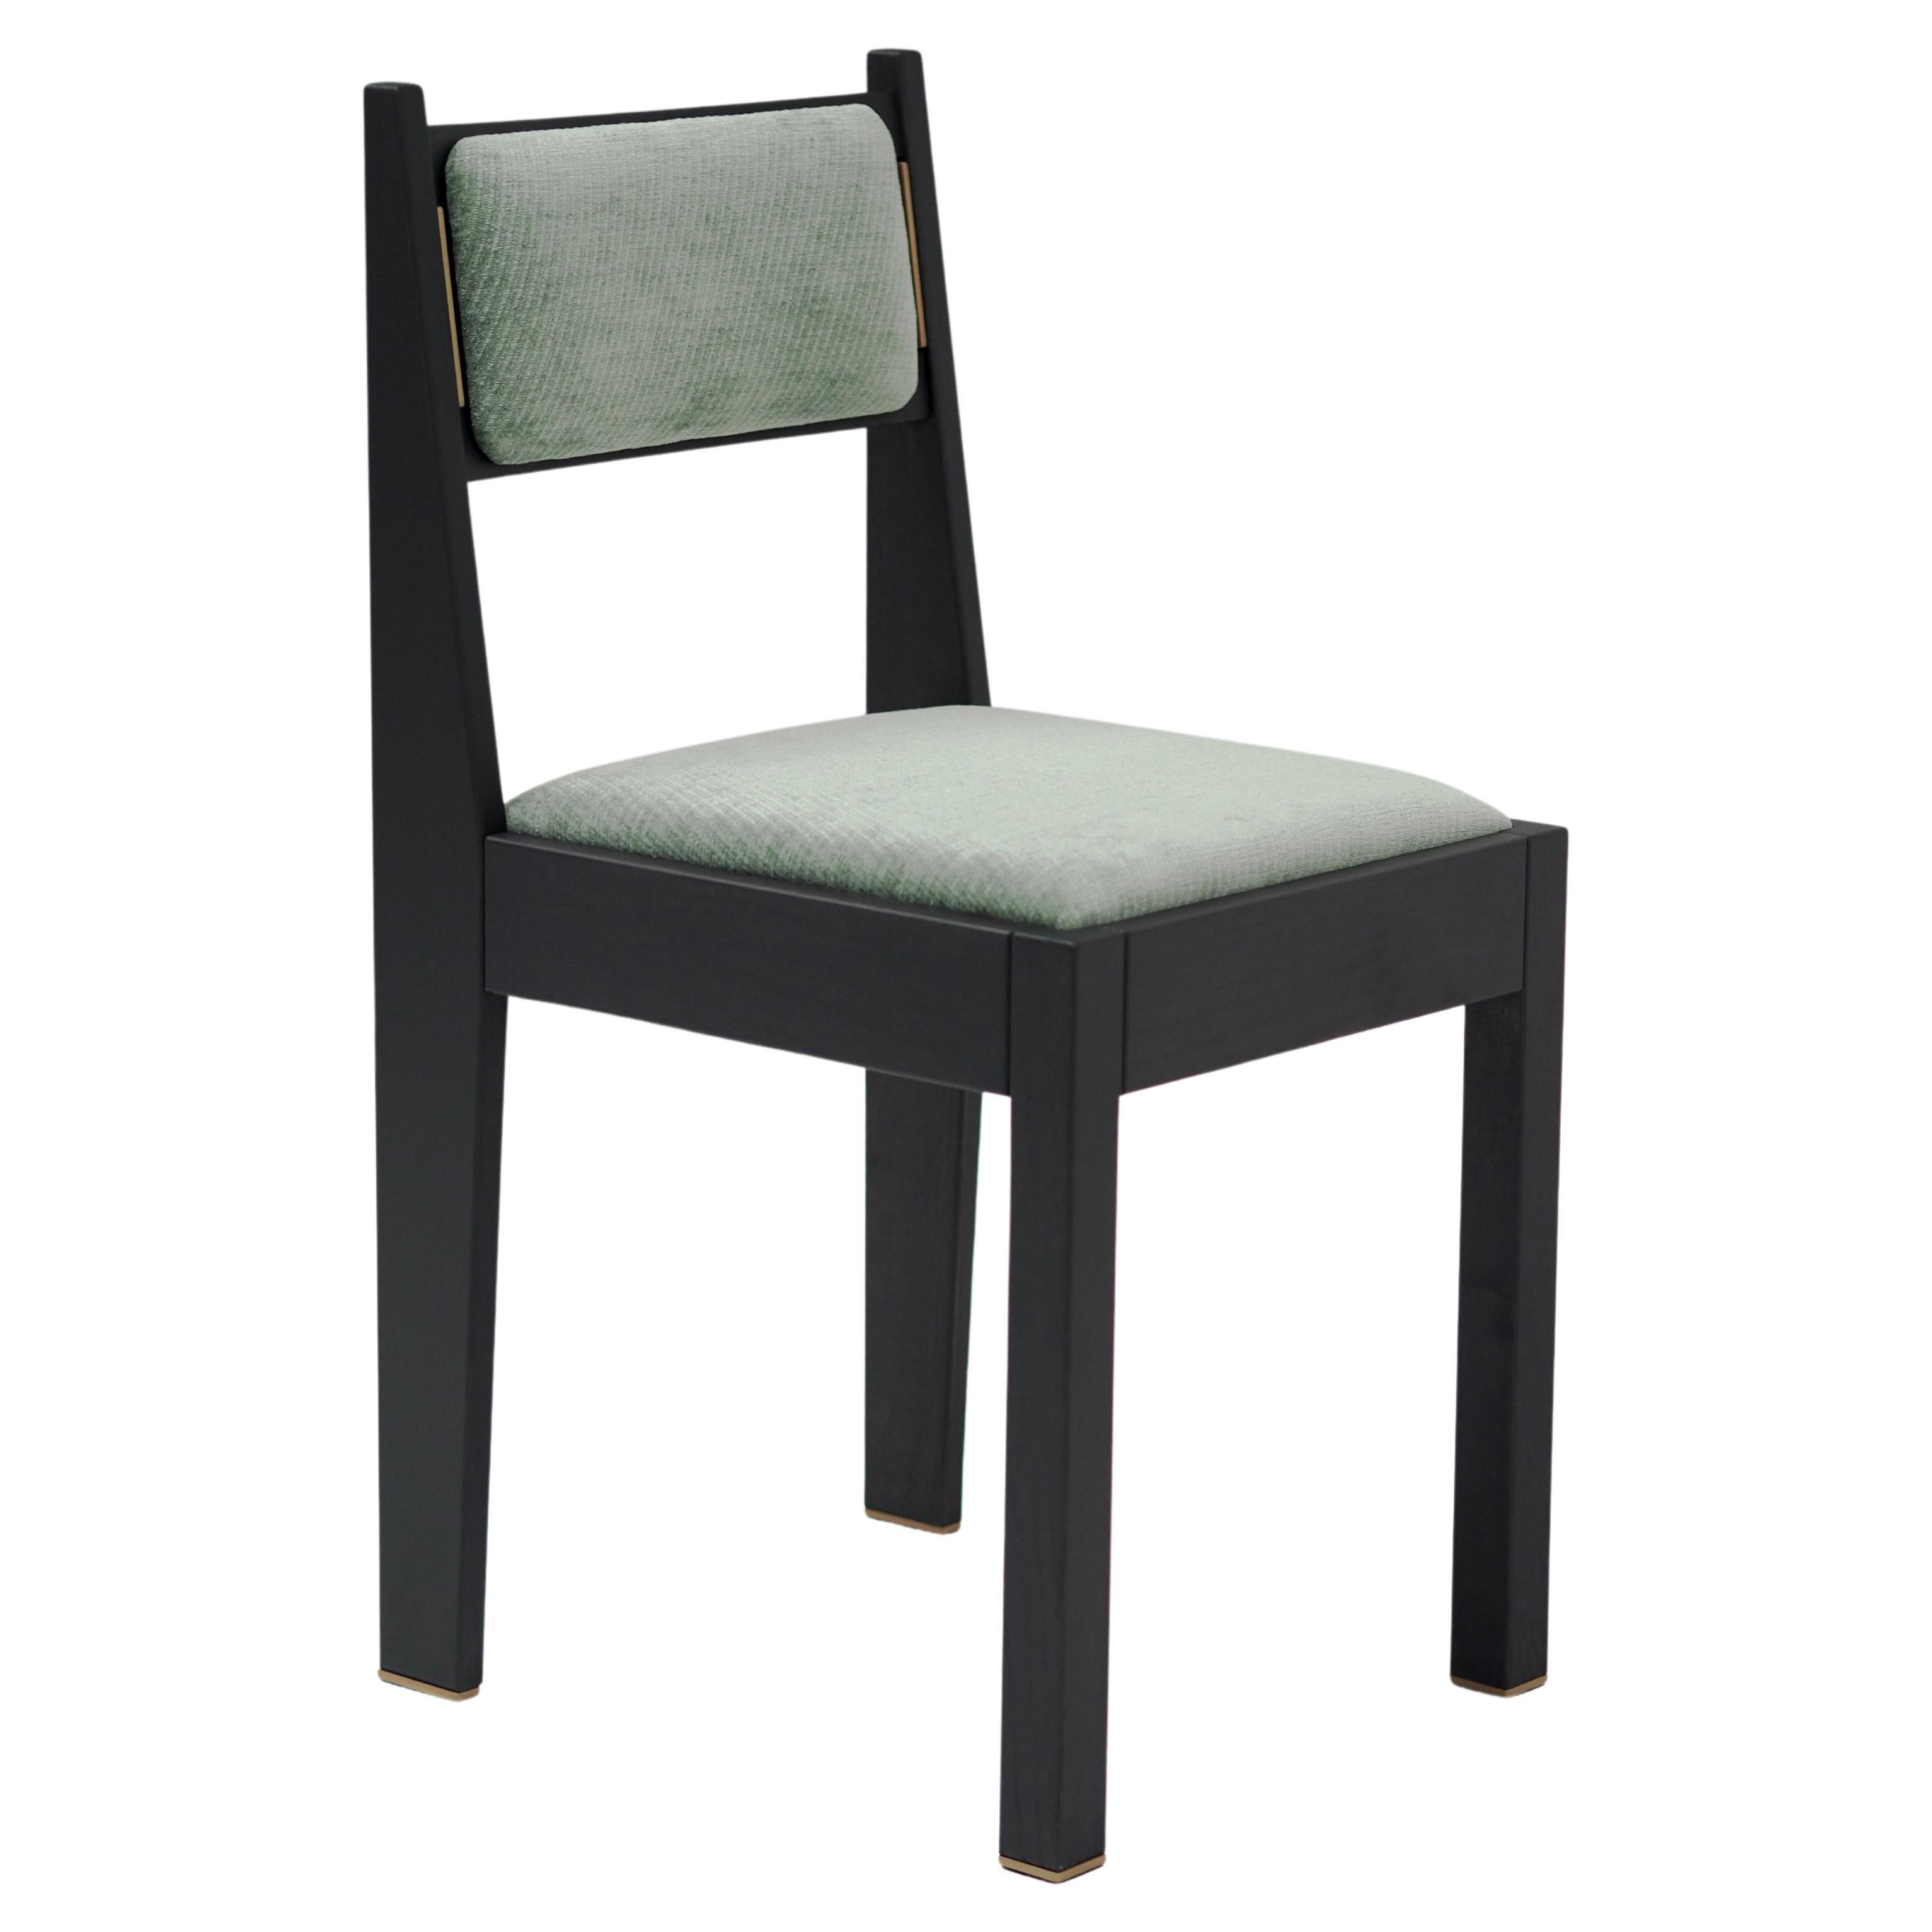 Contemporary Art Deco Chair, Black Ash Wood, Green Upholstery & Brass Details For Sale